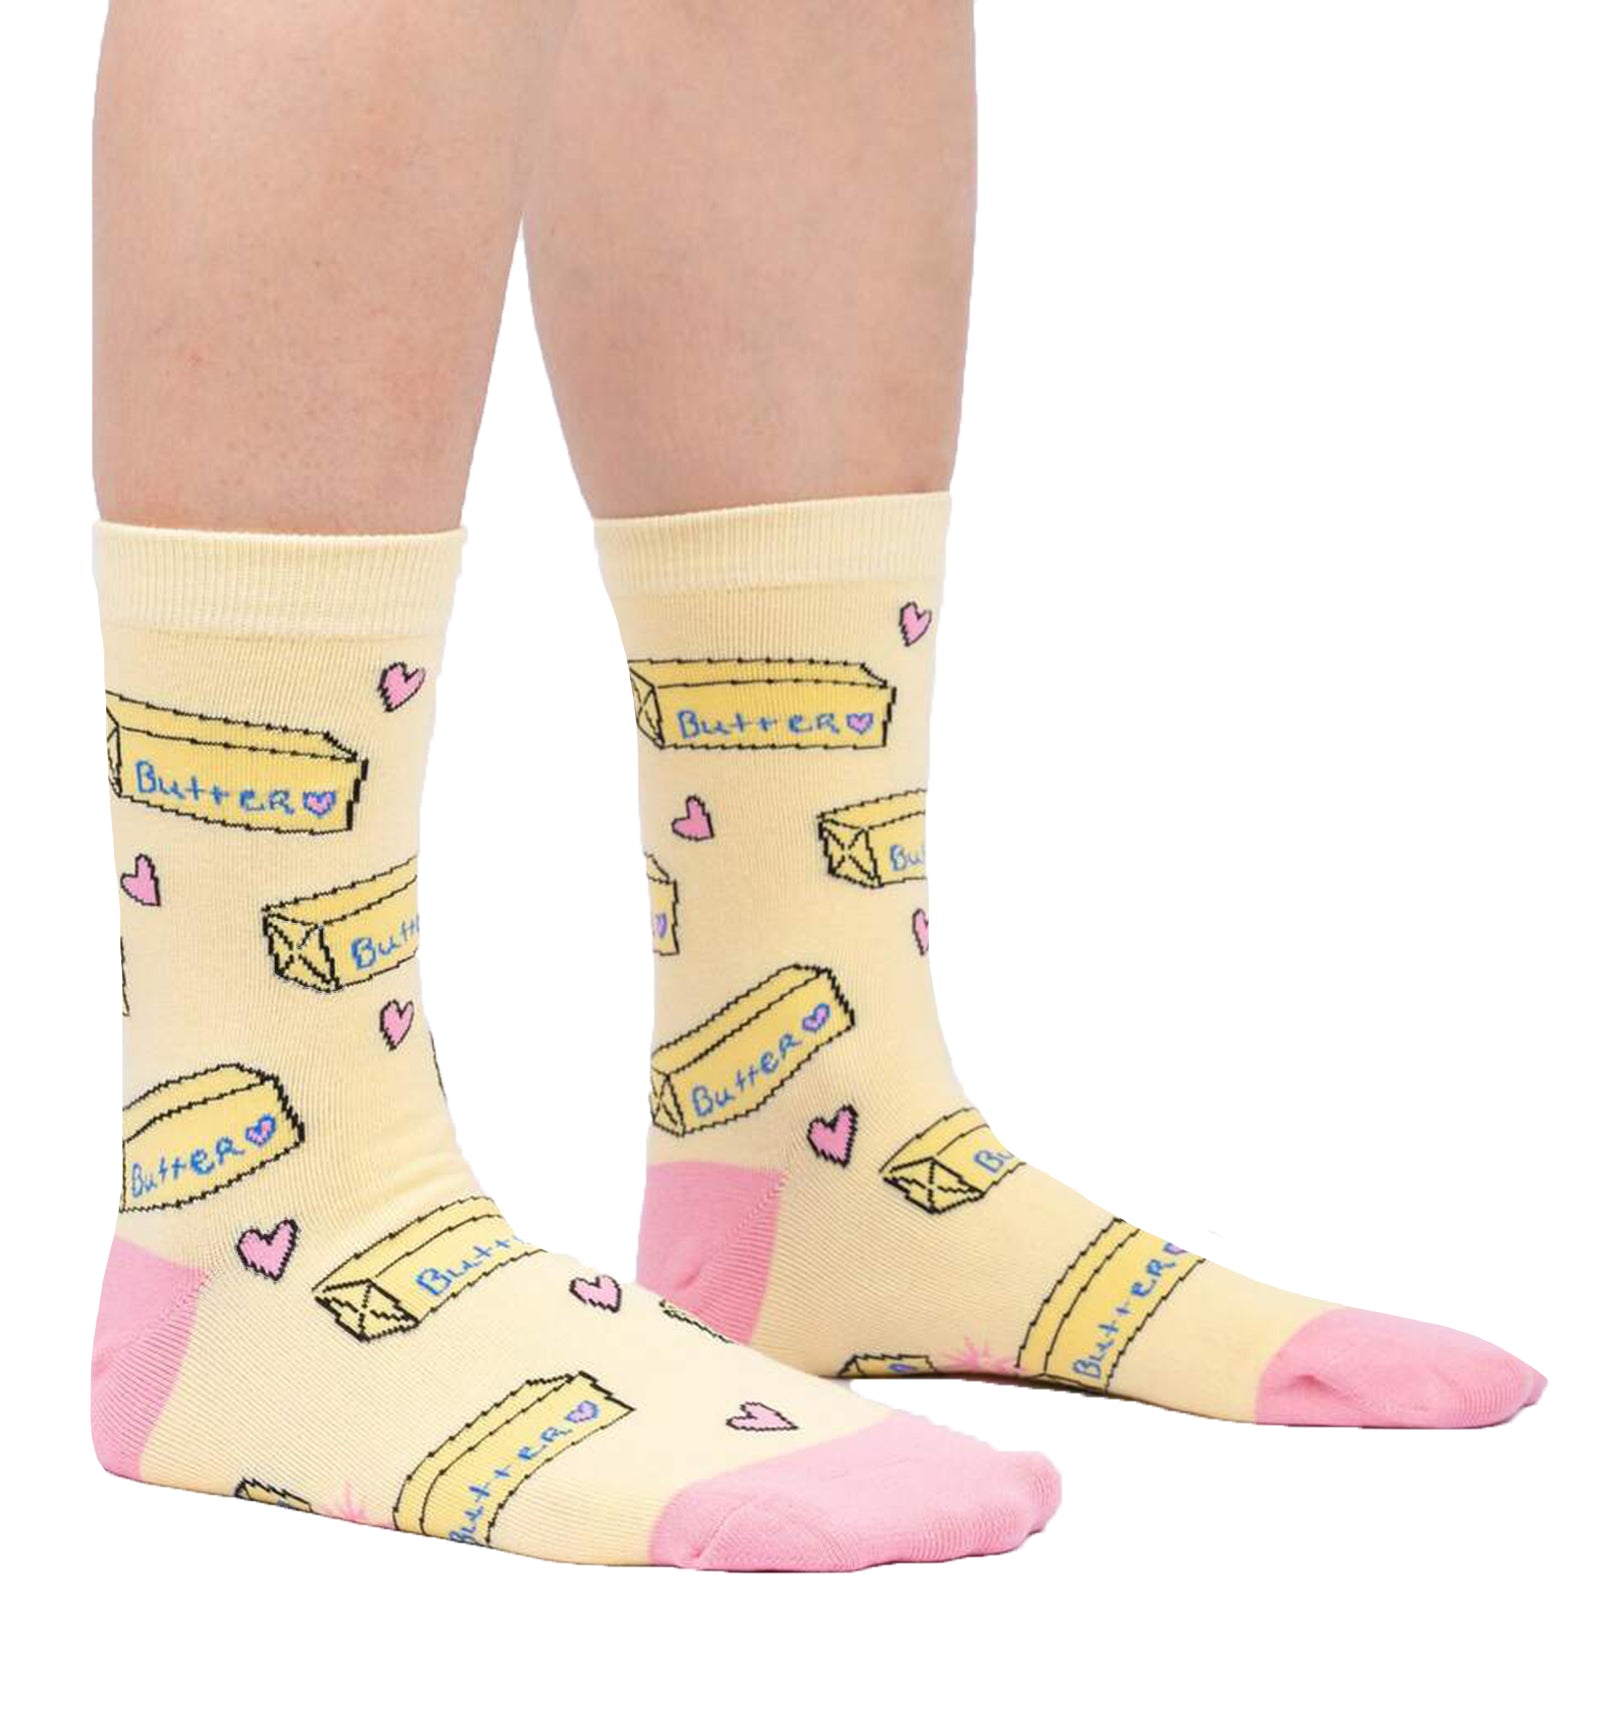 SOCK it to me Women's Crew Socks (W0433),Butter Me Up - Butter Me Up,One Size